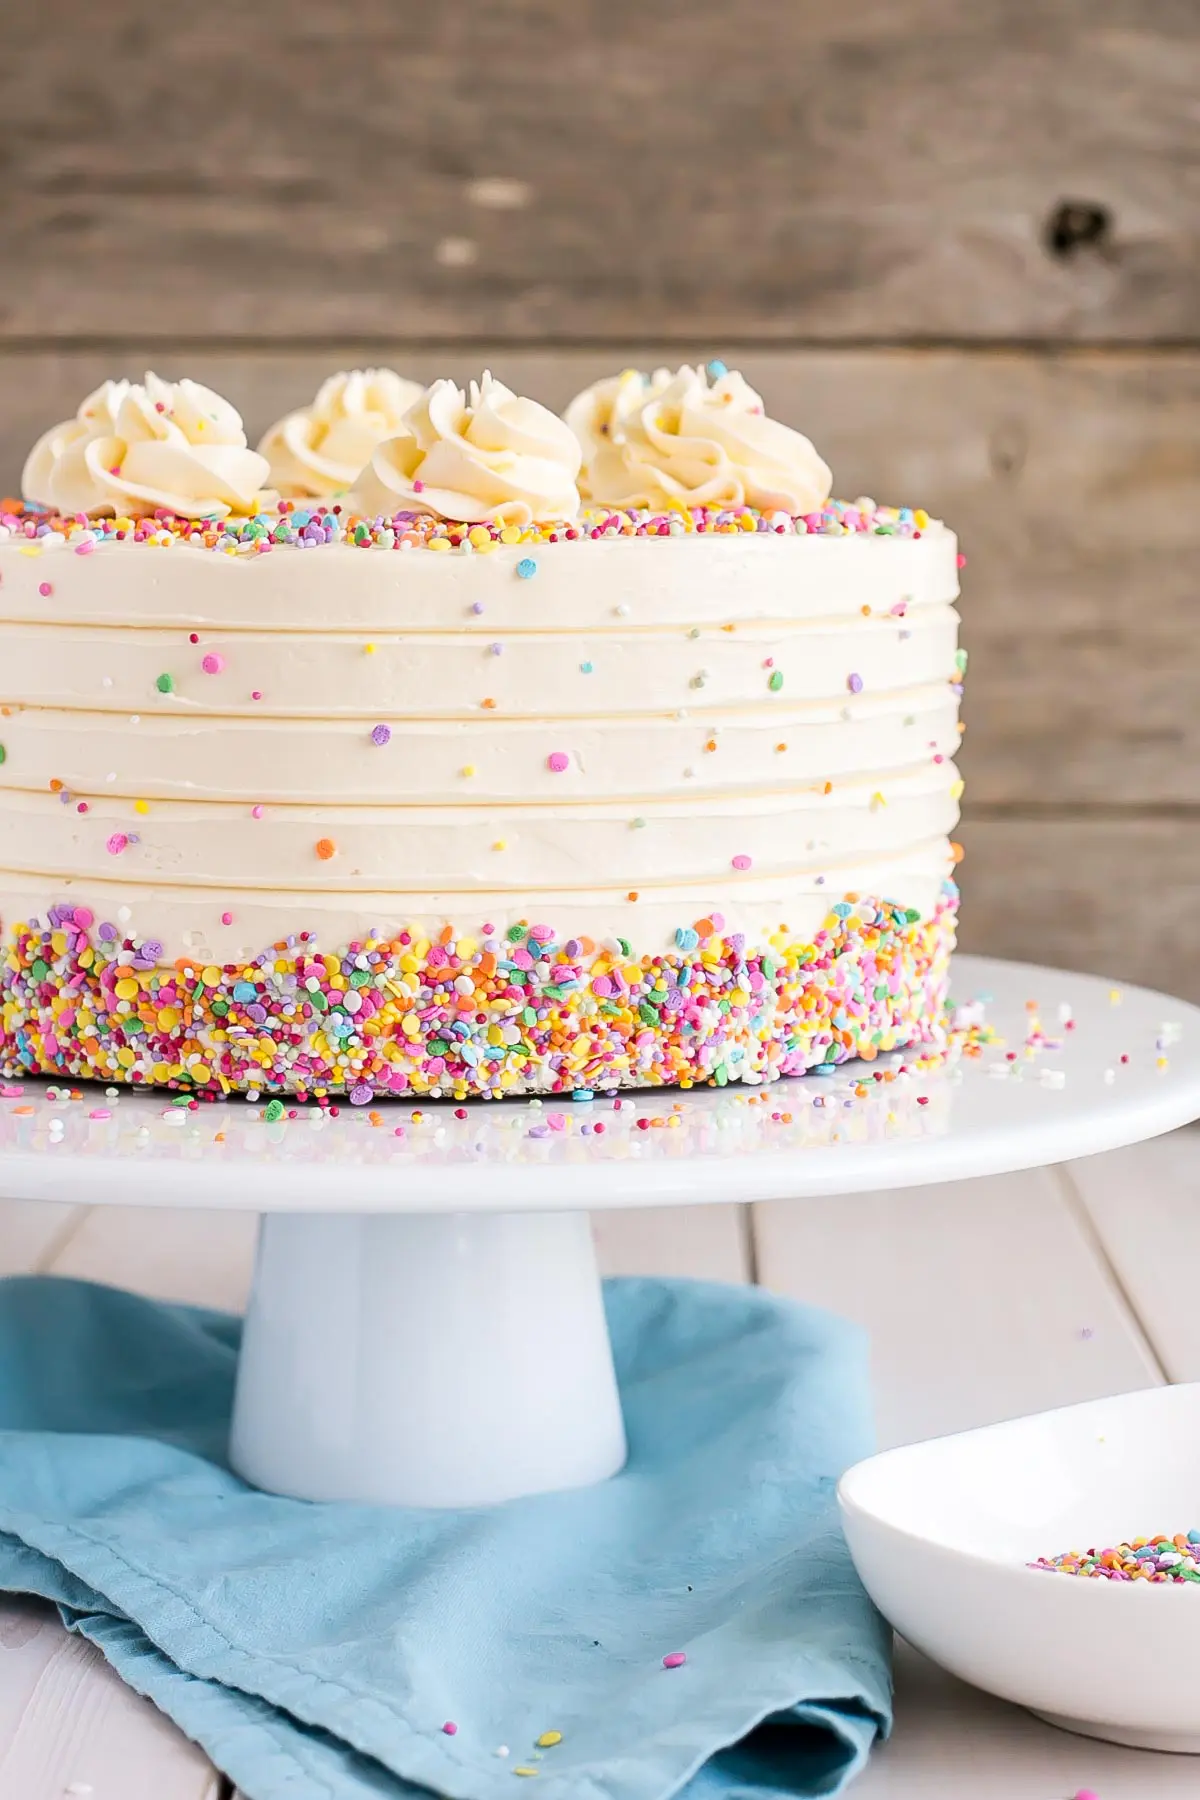 Cake on a white cake stand, decorated with confetti sprinkles.